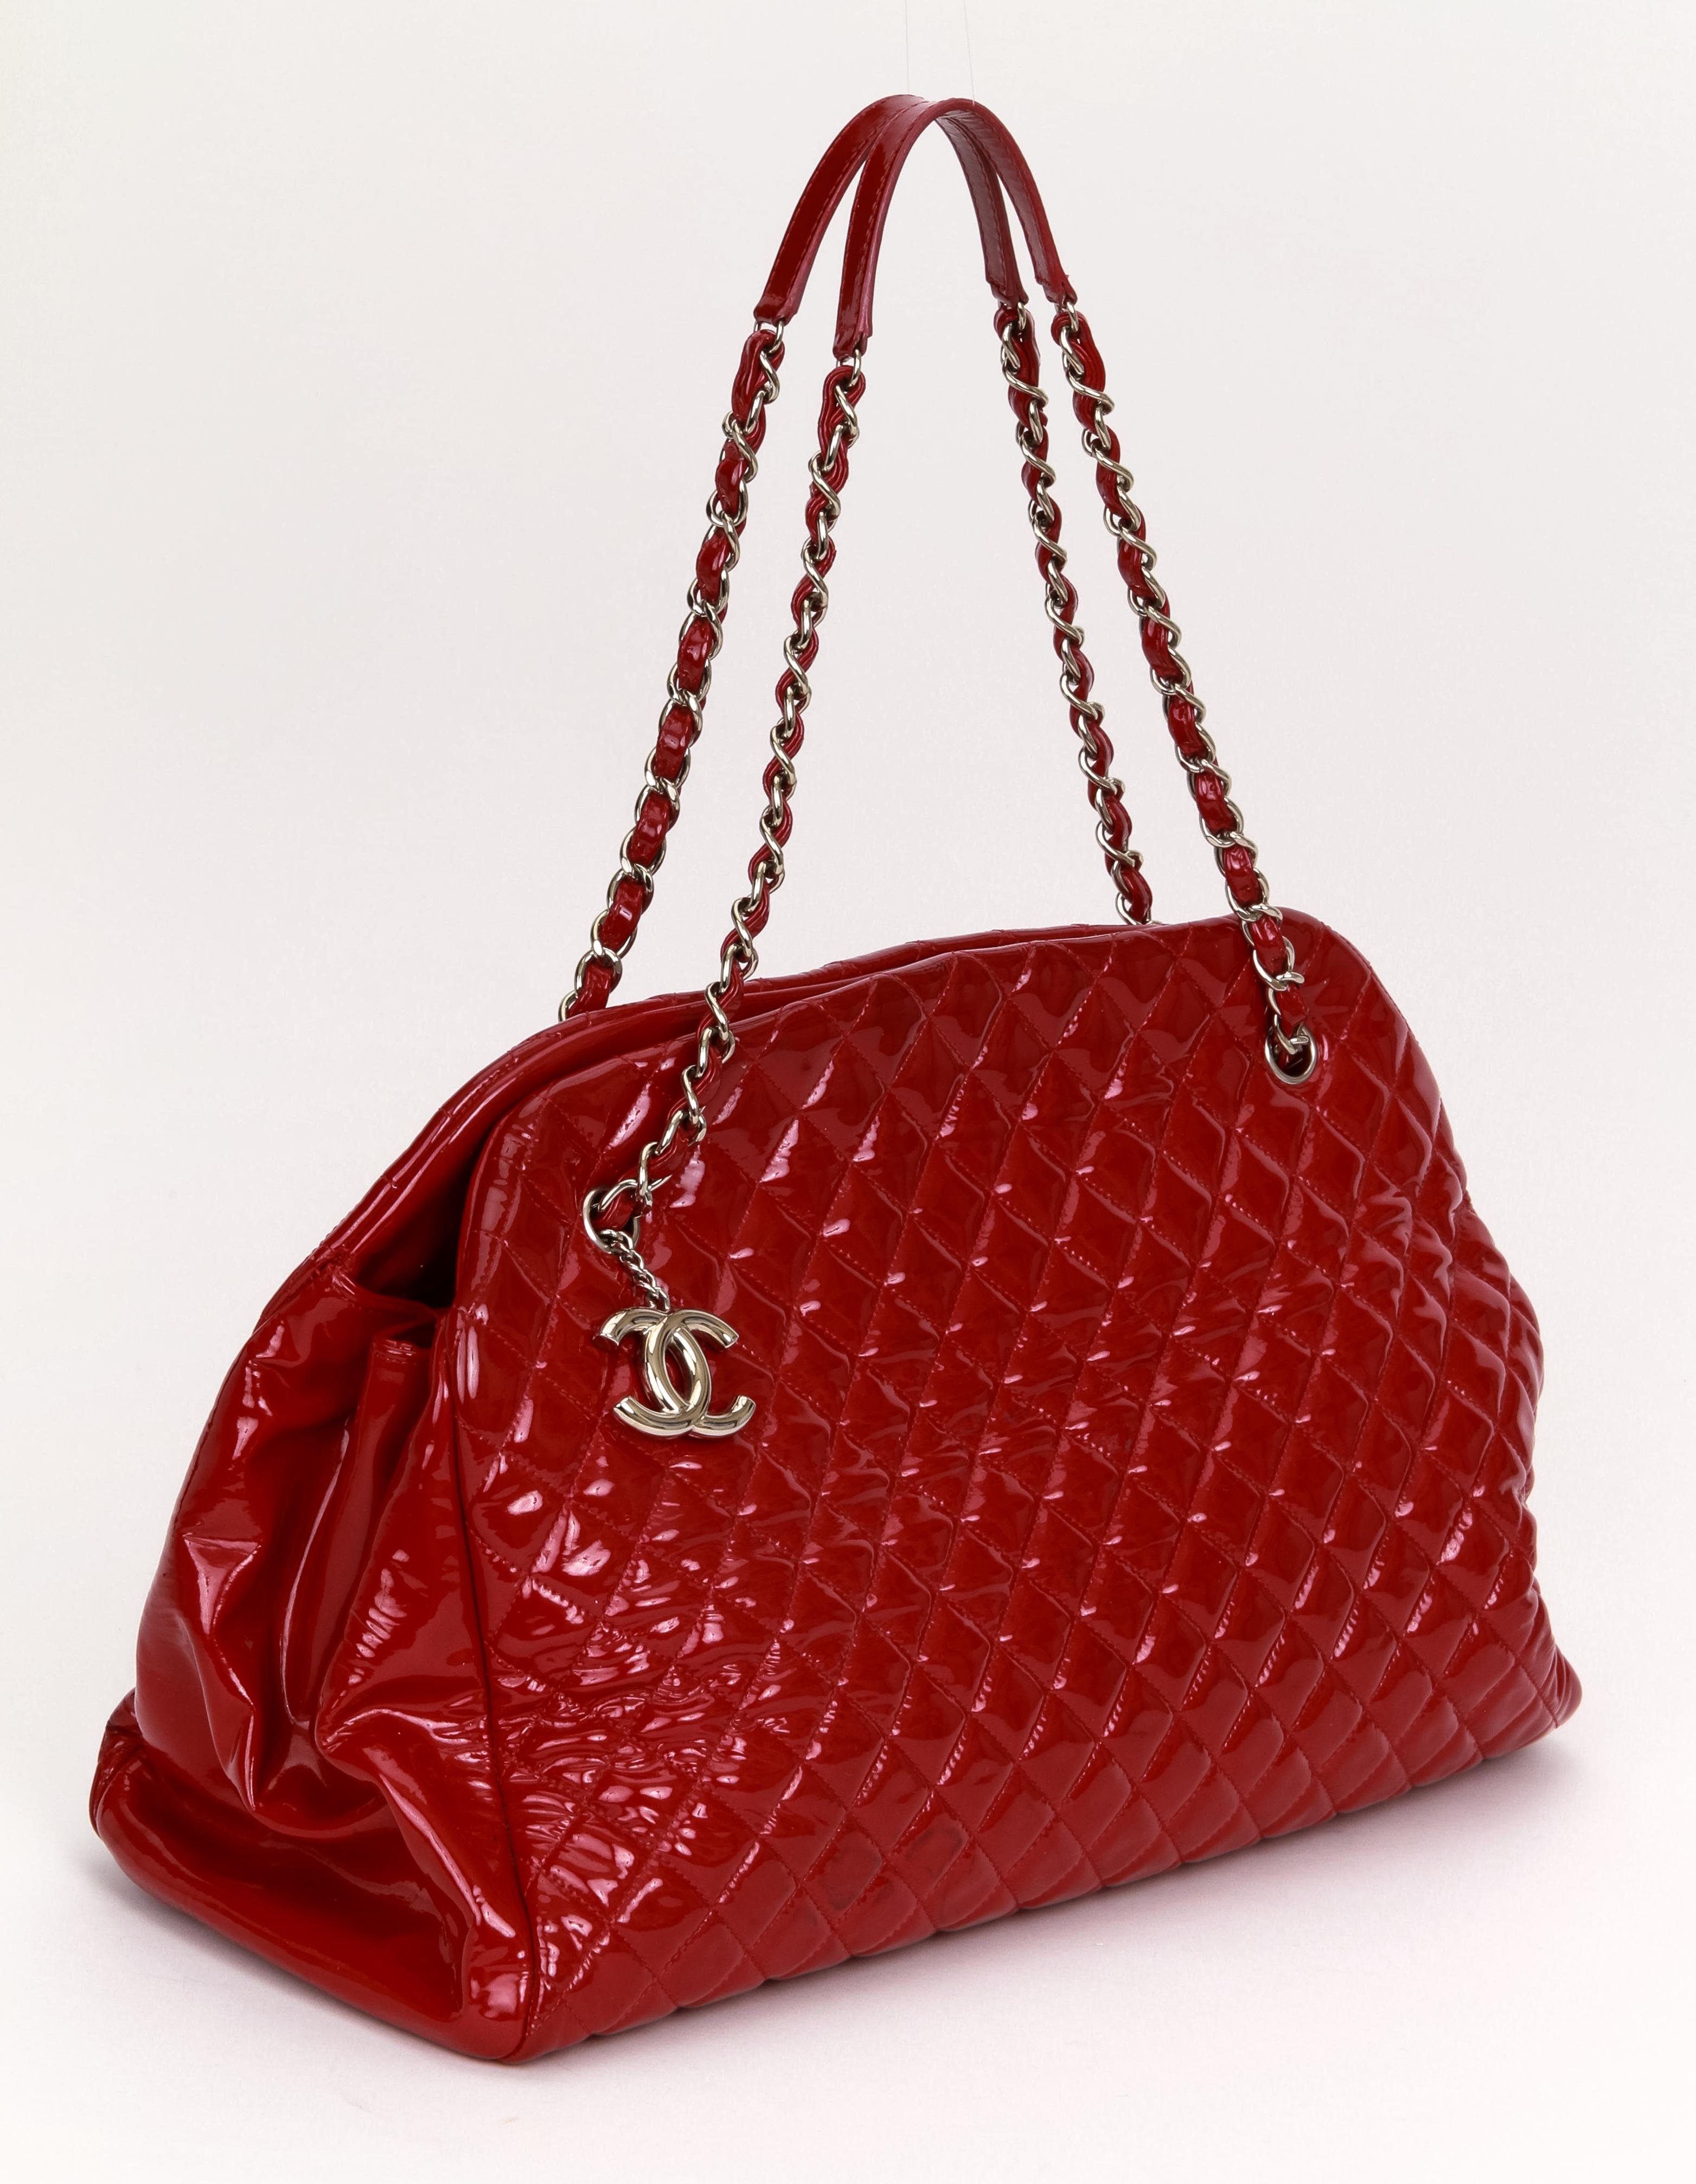 Chanel xxl red patent leather mademoiselle bag with silver tone hardware. Darkening is visible throughout the bag, please refer to photos. it looks like a degrade' design. Collection 2011. Shoulder drop 8